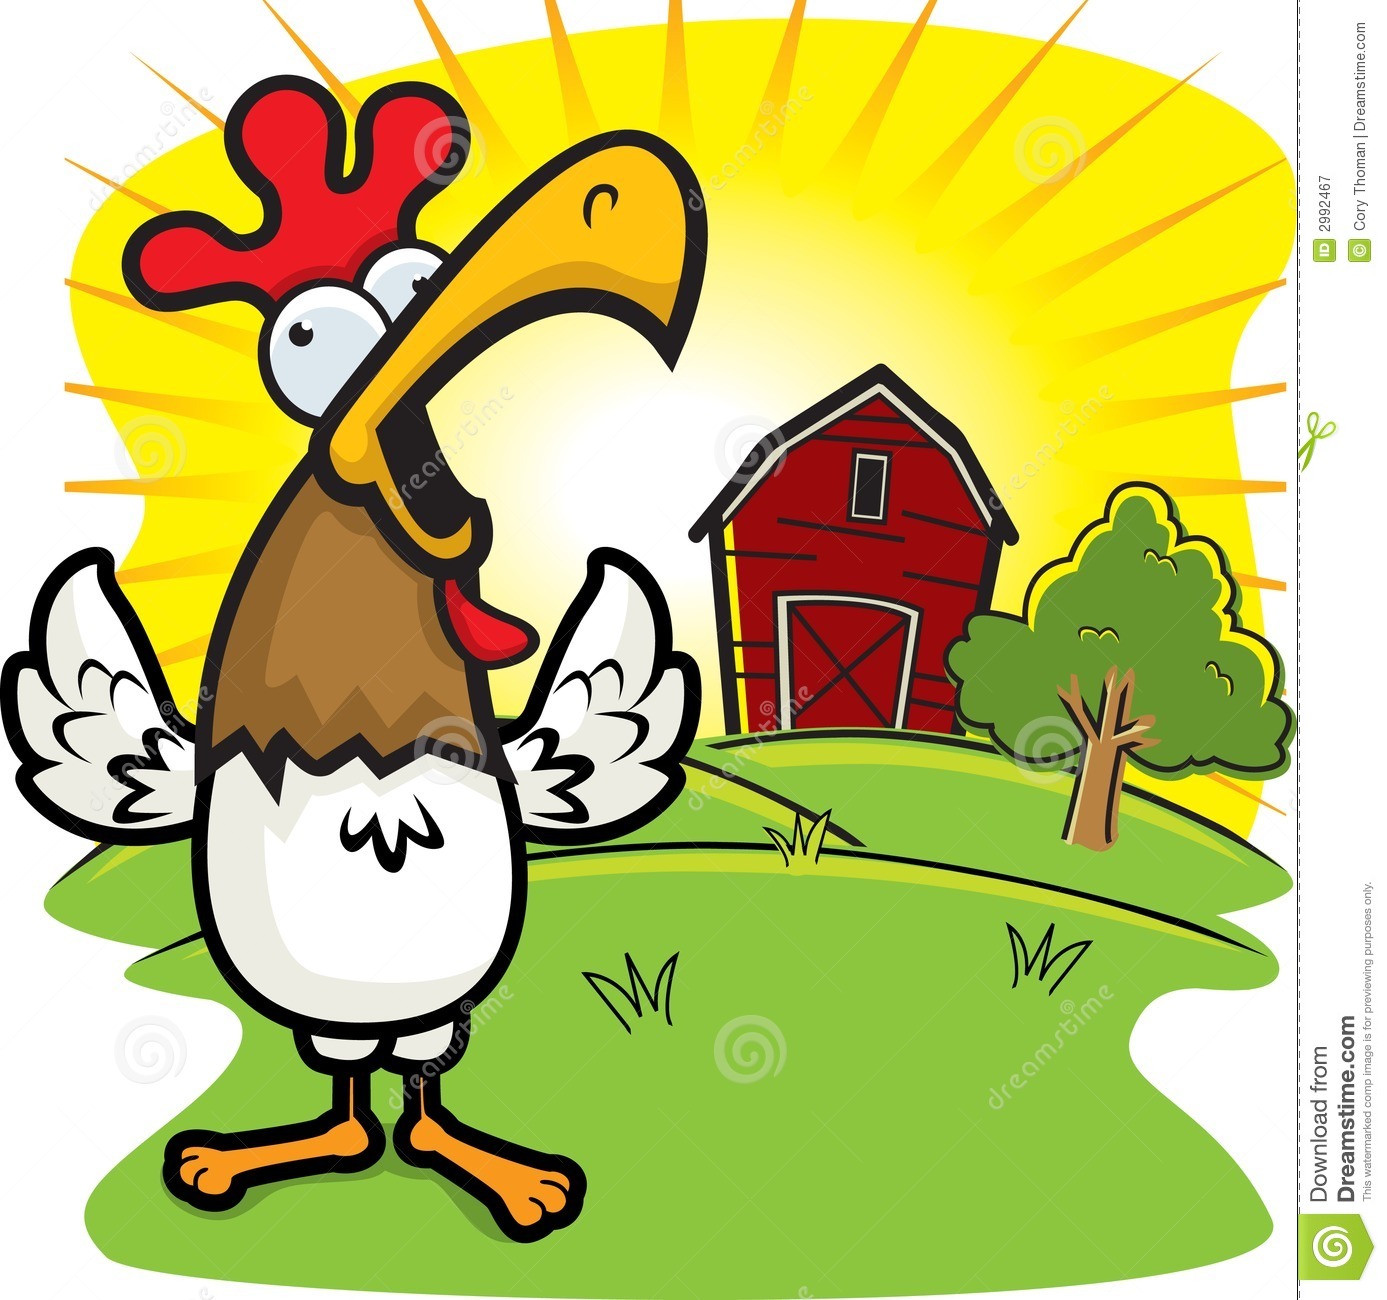 Morning clip art vector morning graphics image. Rooster Crowing Royalty Free Stock Photography Image 2992467